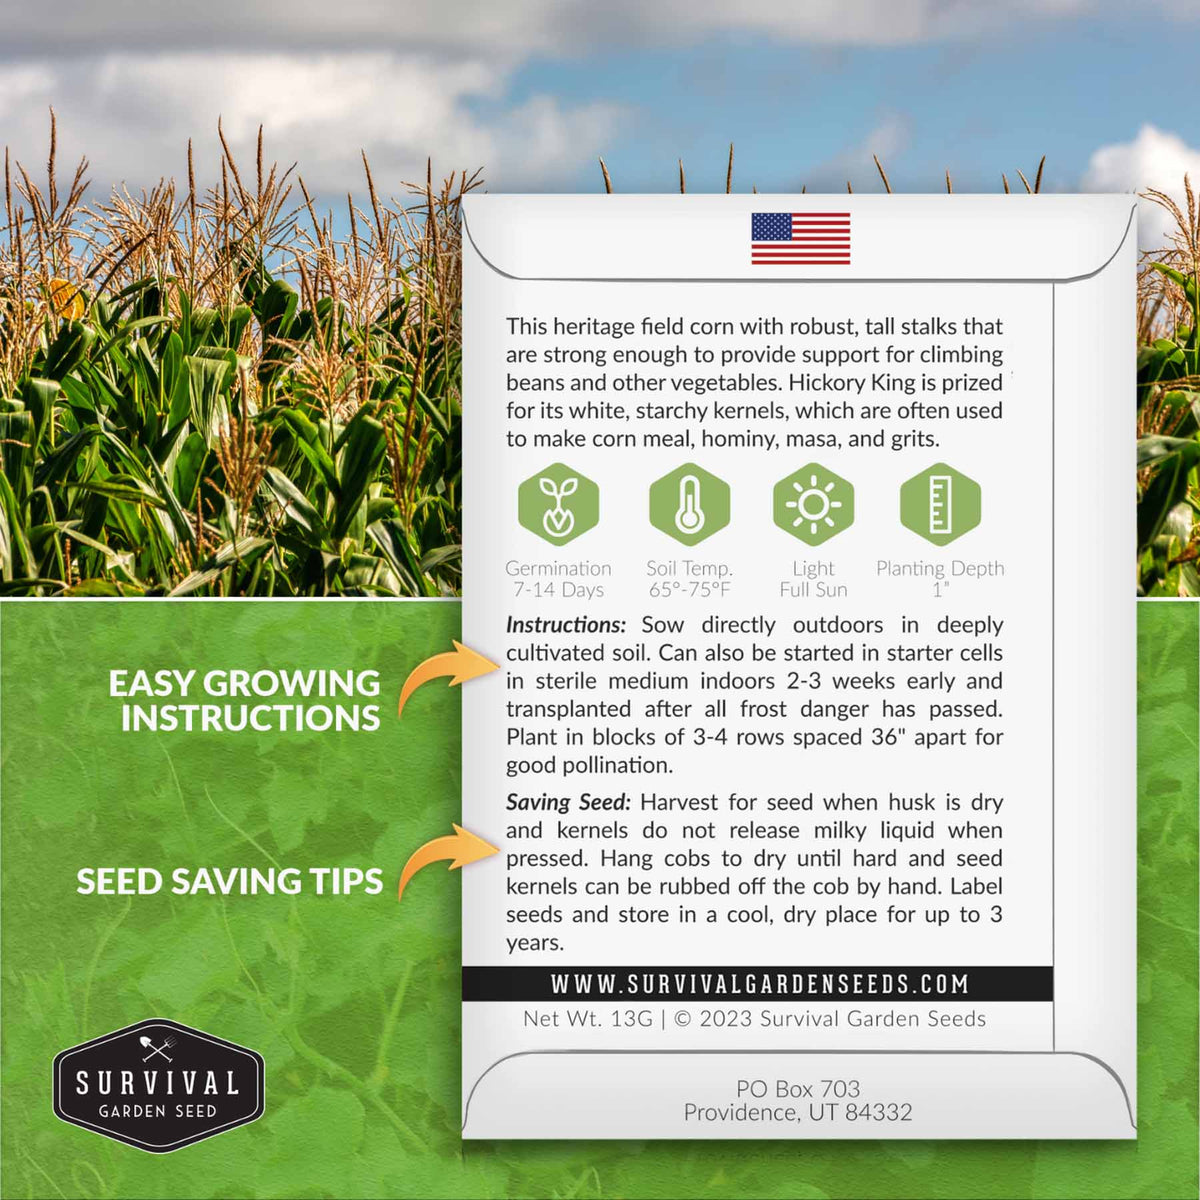 Hickory King Corn seed growing instructions